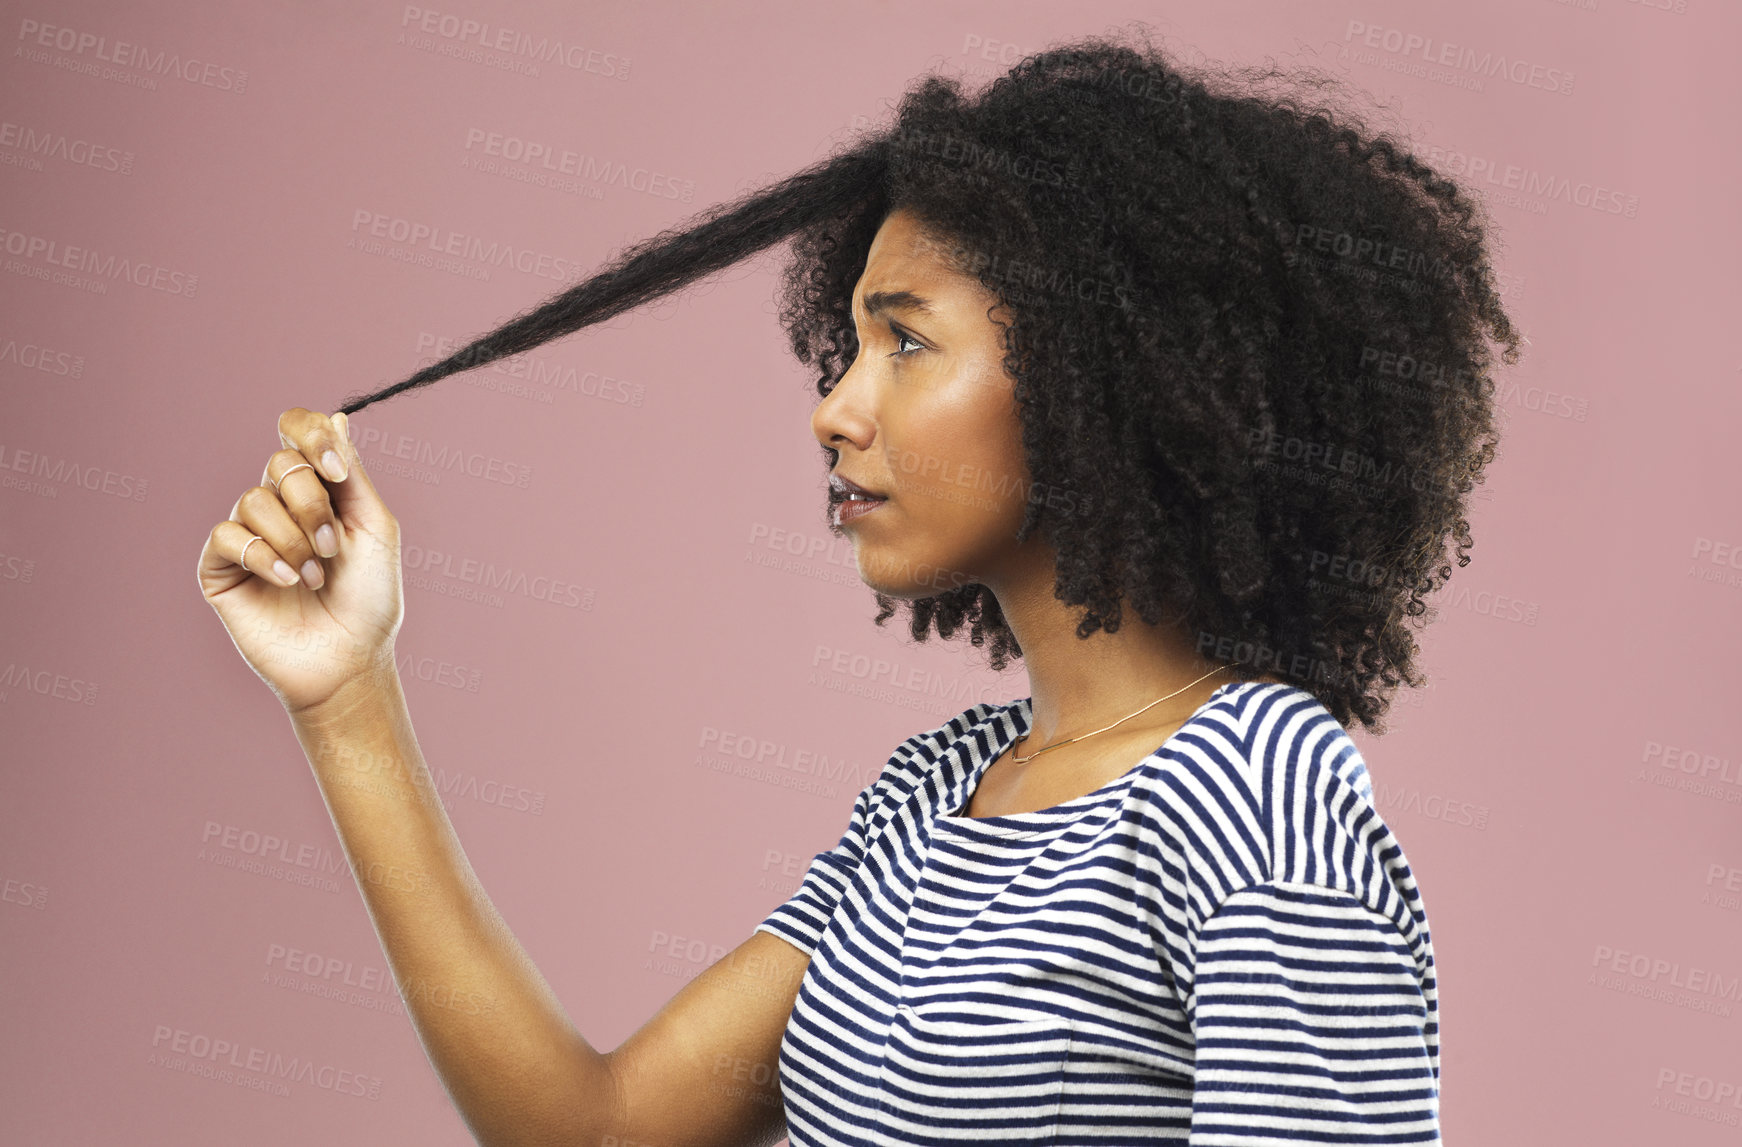 Buy stock photo Studio shot of a beautiful young woman holding up a strand of hair